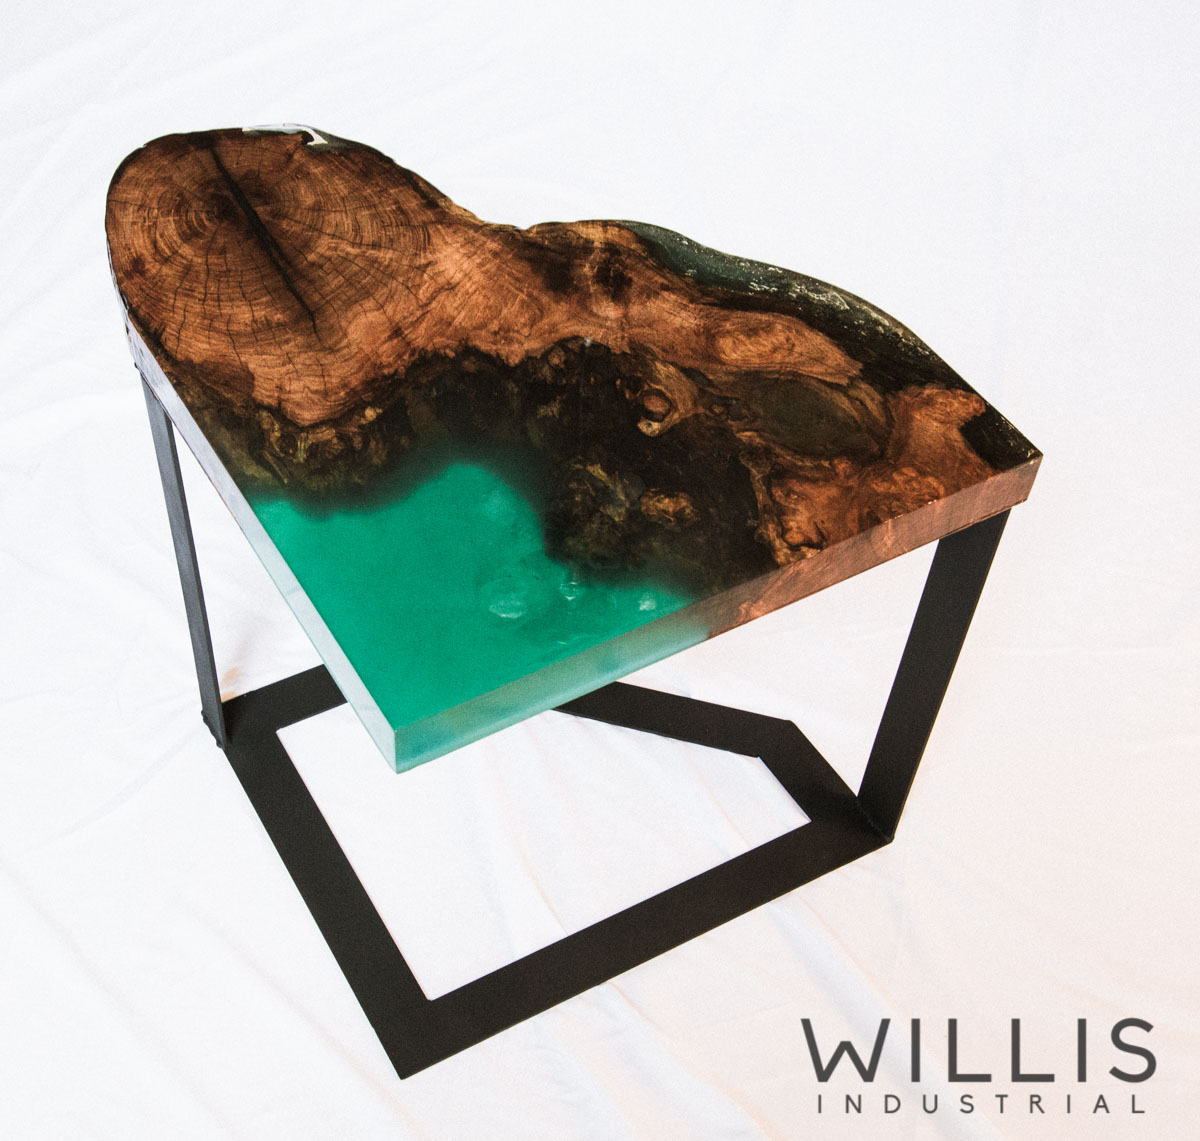 Willis Industrial Furniture | Rustic, Modern Furniture | Mesquite and Epoxy open edged Table